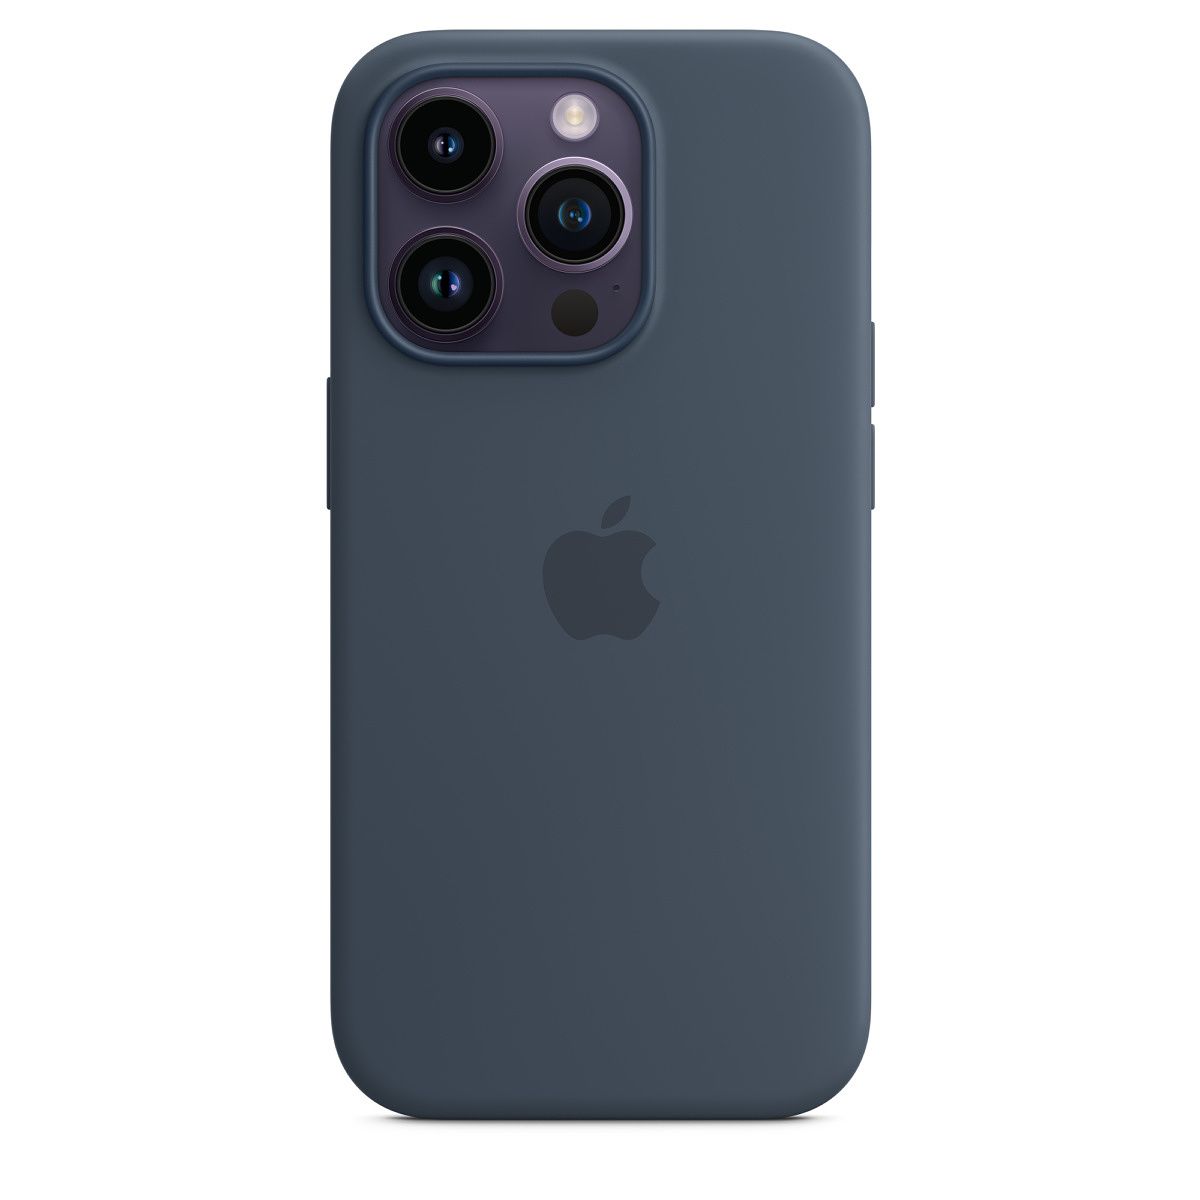 Featuring silky, soft-touch exterior, this official silicone case feels great in hand and has a microfiber interior for extra protection. It's available in a wide selection of colors, including PRODUCT Red, Storm Blue, Lilac, Sunglow, Midnight, and Chalk Pink.